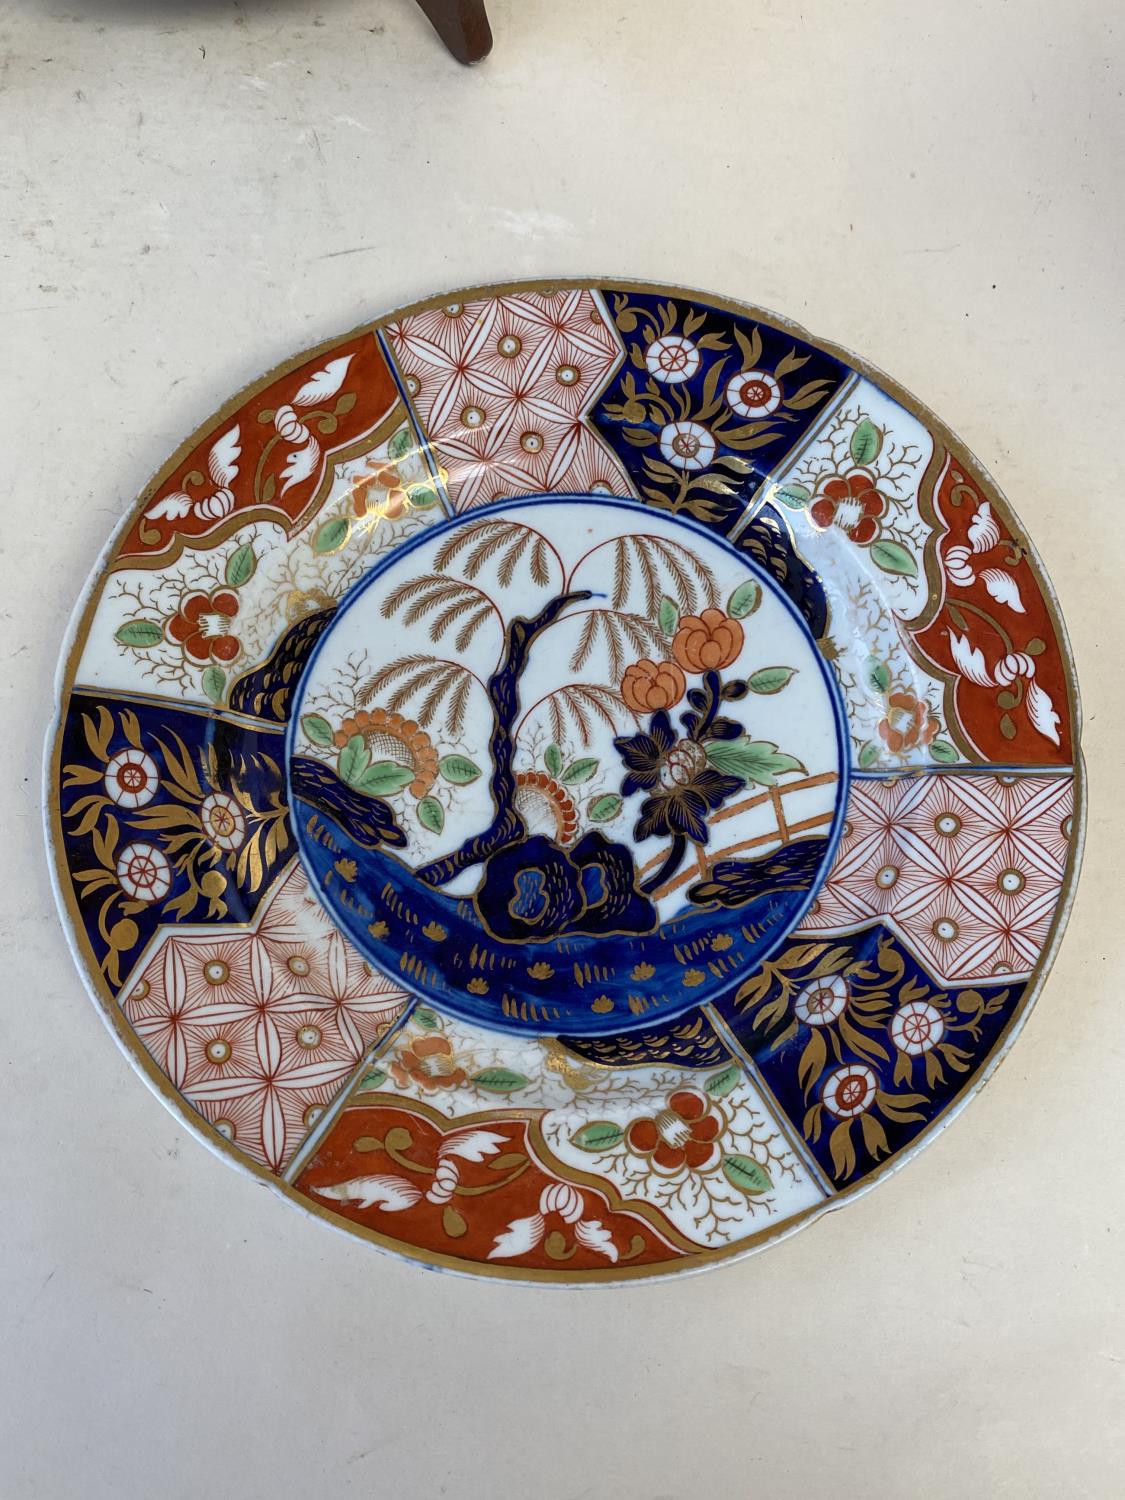 Tin glazed Delft plate 29cm diam, (rim chipped), Imari circular plate cracked and a florally - Image 4 of 8